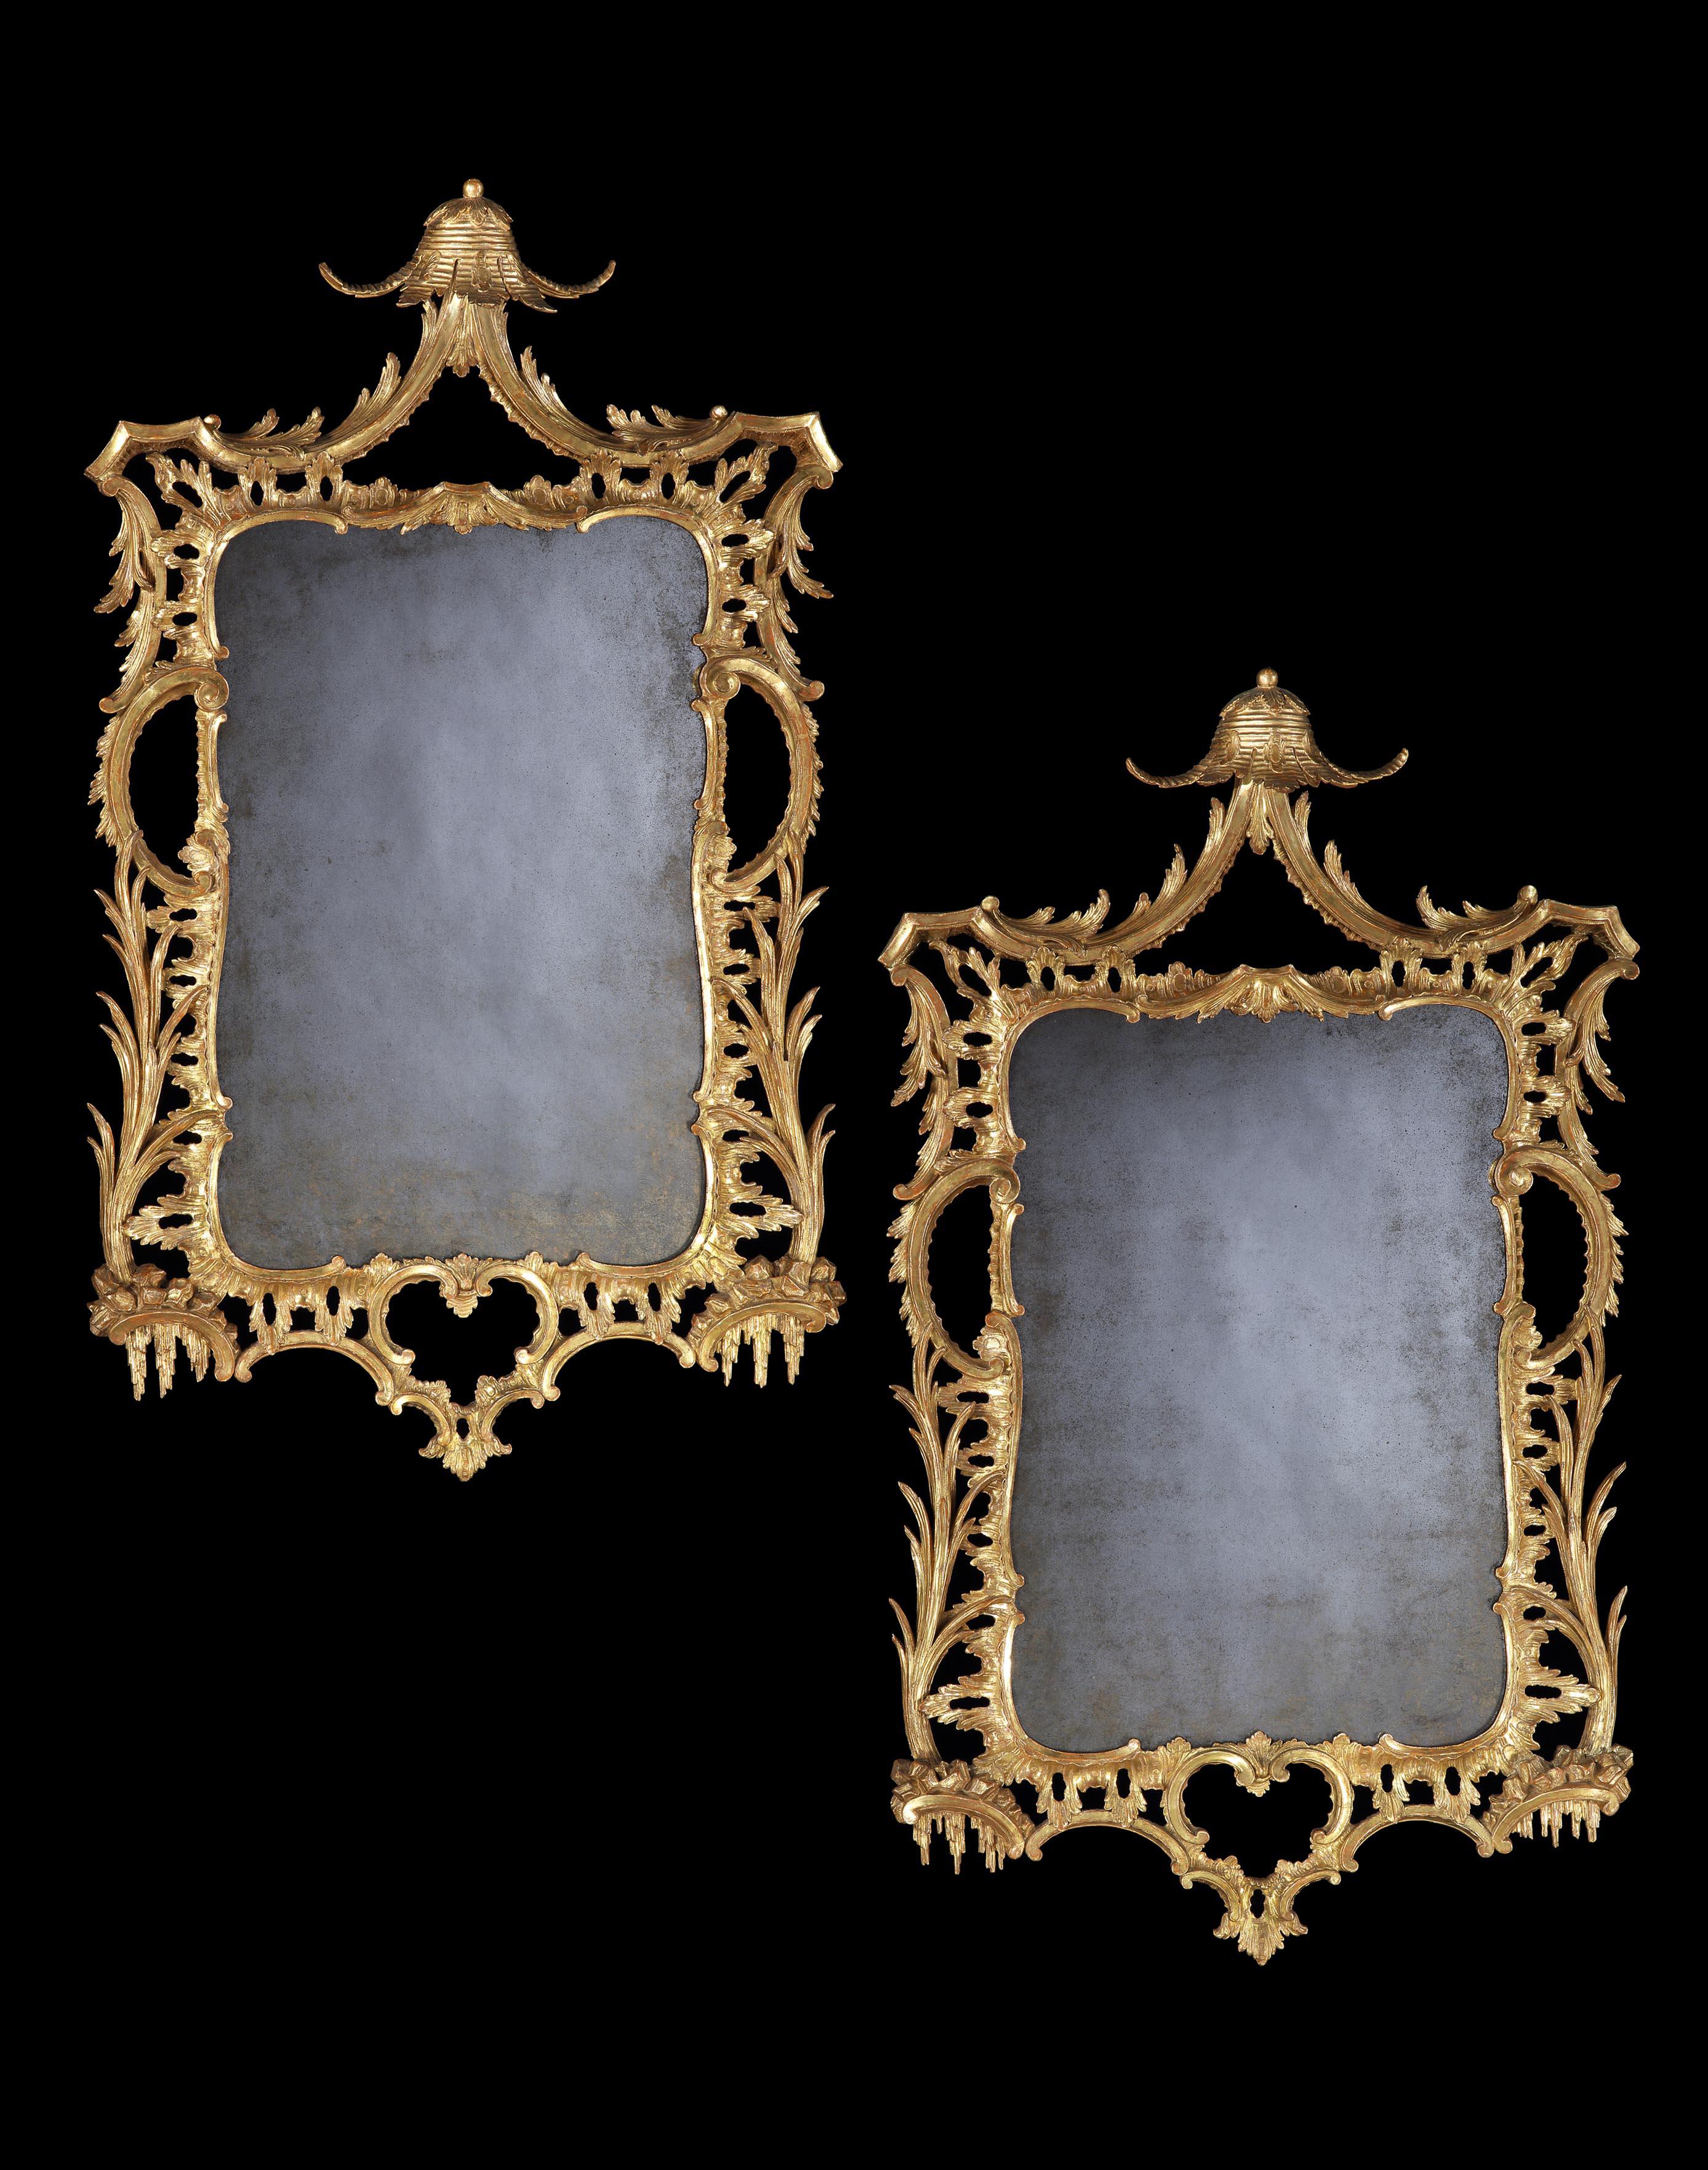 Pair of George III Carved and Gilded Mirrors im Zustand „Hervorragend“ im Angebot in London, GB